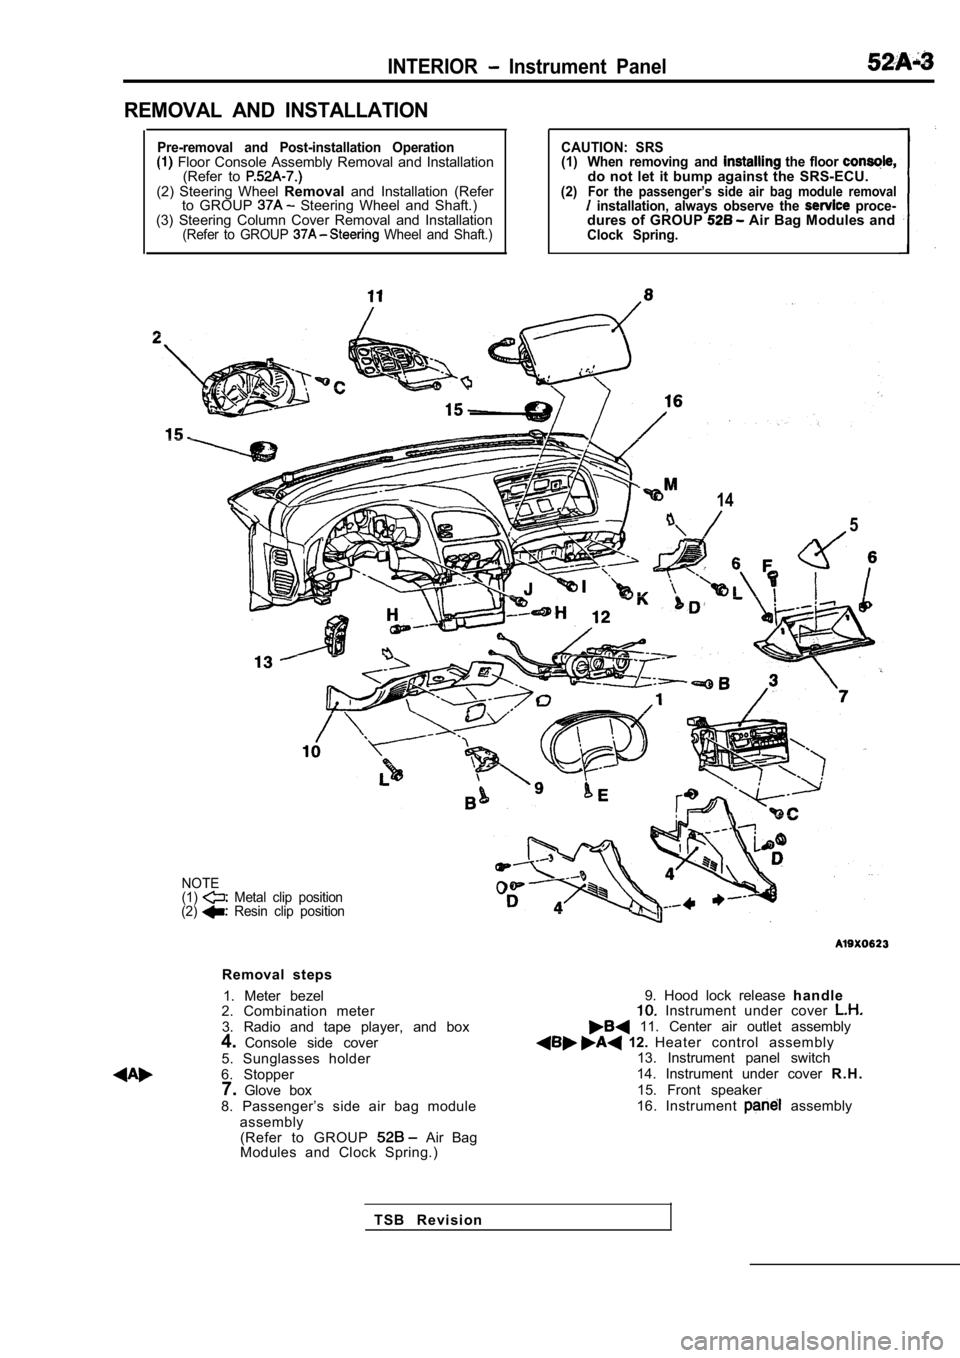 MITSUBISHI SPYDER 1990  Service Repair Manual INTERIOR  Instrument  Panel
REMOVAL  AND  INSTALLATION
Pre-removal  and  Post-installation  Operation  Floor  Console  Assembly  Removal  and  Installation(Refer  to 
(2)  Steering  Wheel  Removaland 